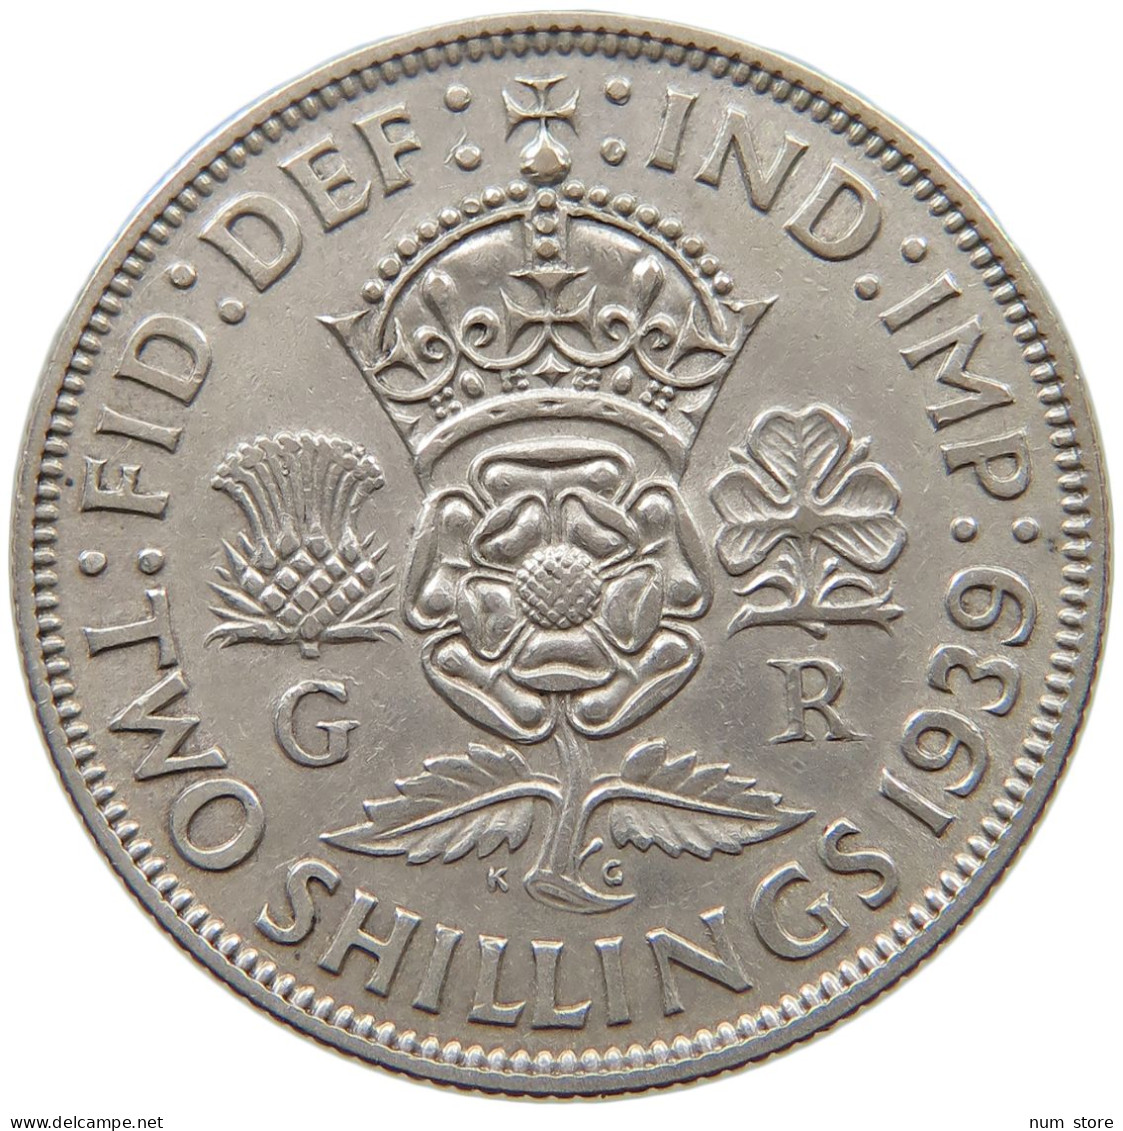 GREAT BRITAIN TWO SHILLINGS 1939 George VI. (1936-1952) #a090 0697 - J. 1 Florin / 2 Shillings